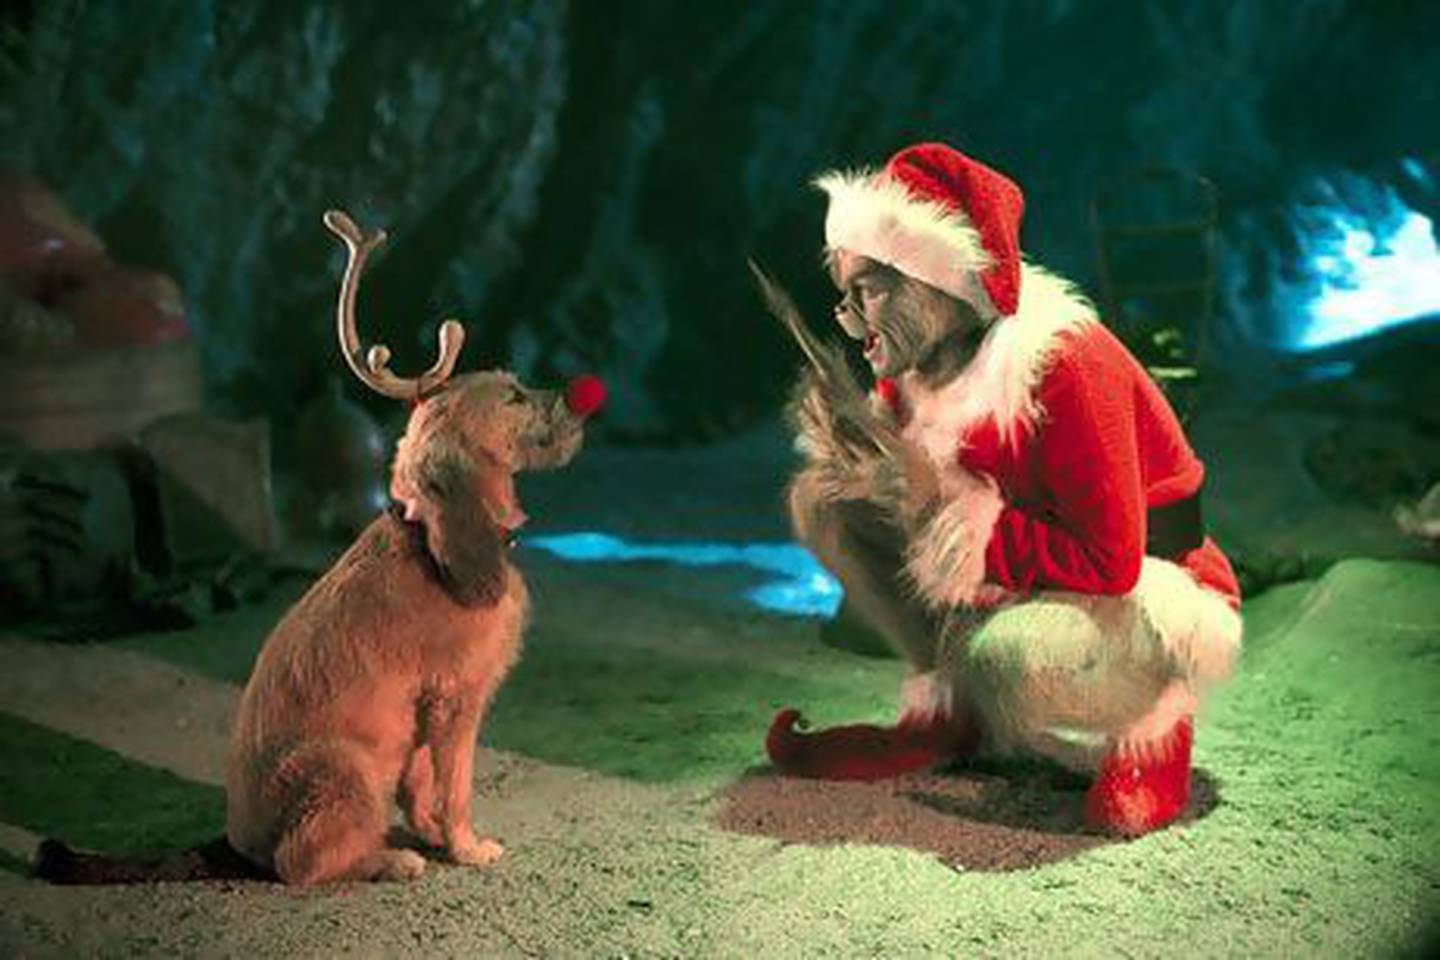 The Grinch, played by Jim Carrey, and his dog Max in "How the Grinch Stole Christmas." Bloomberg News